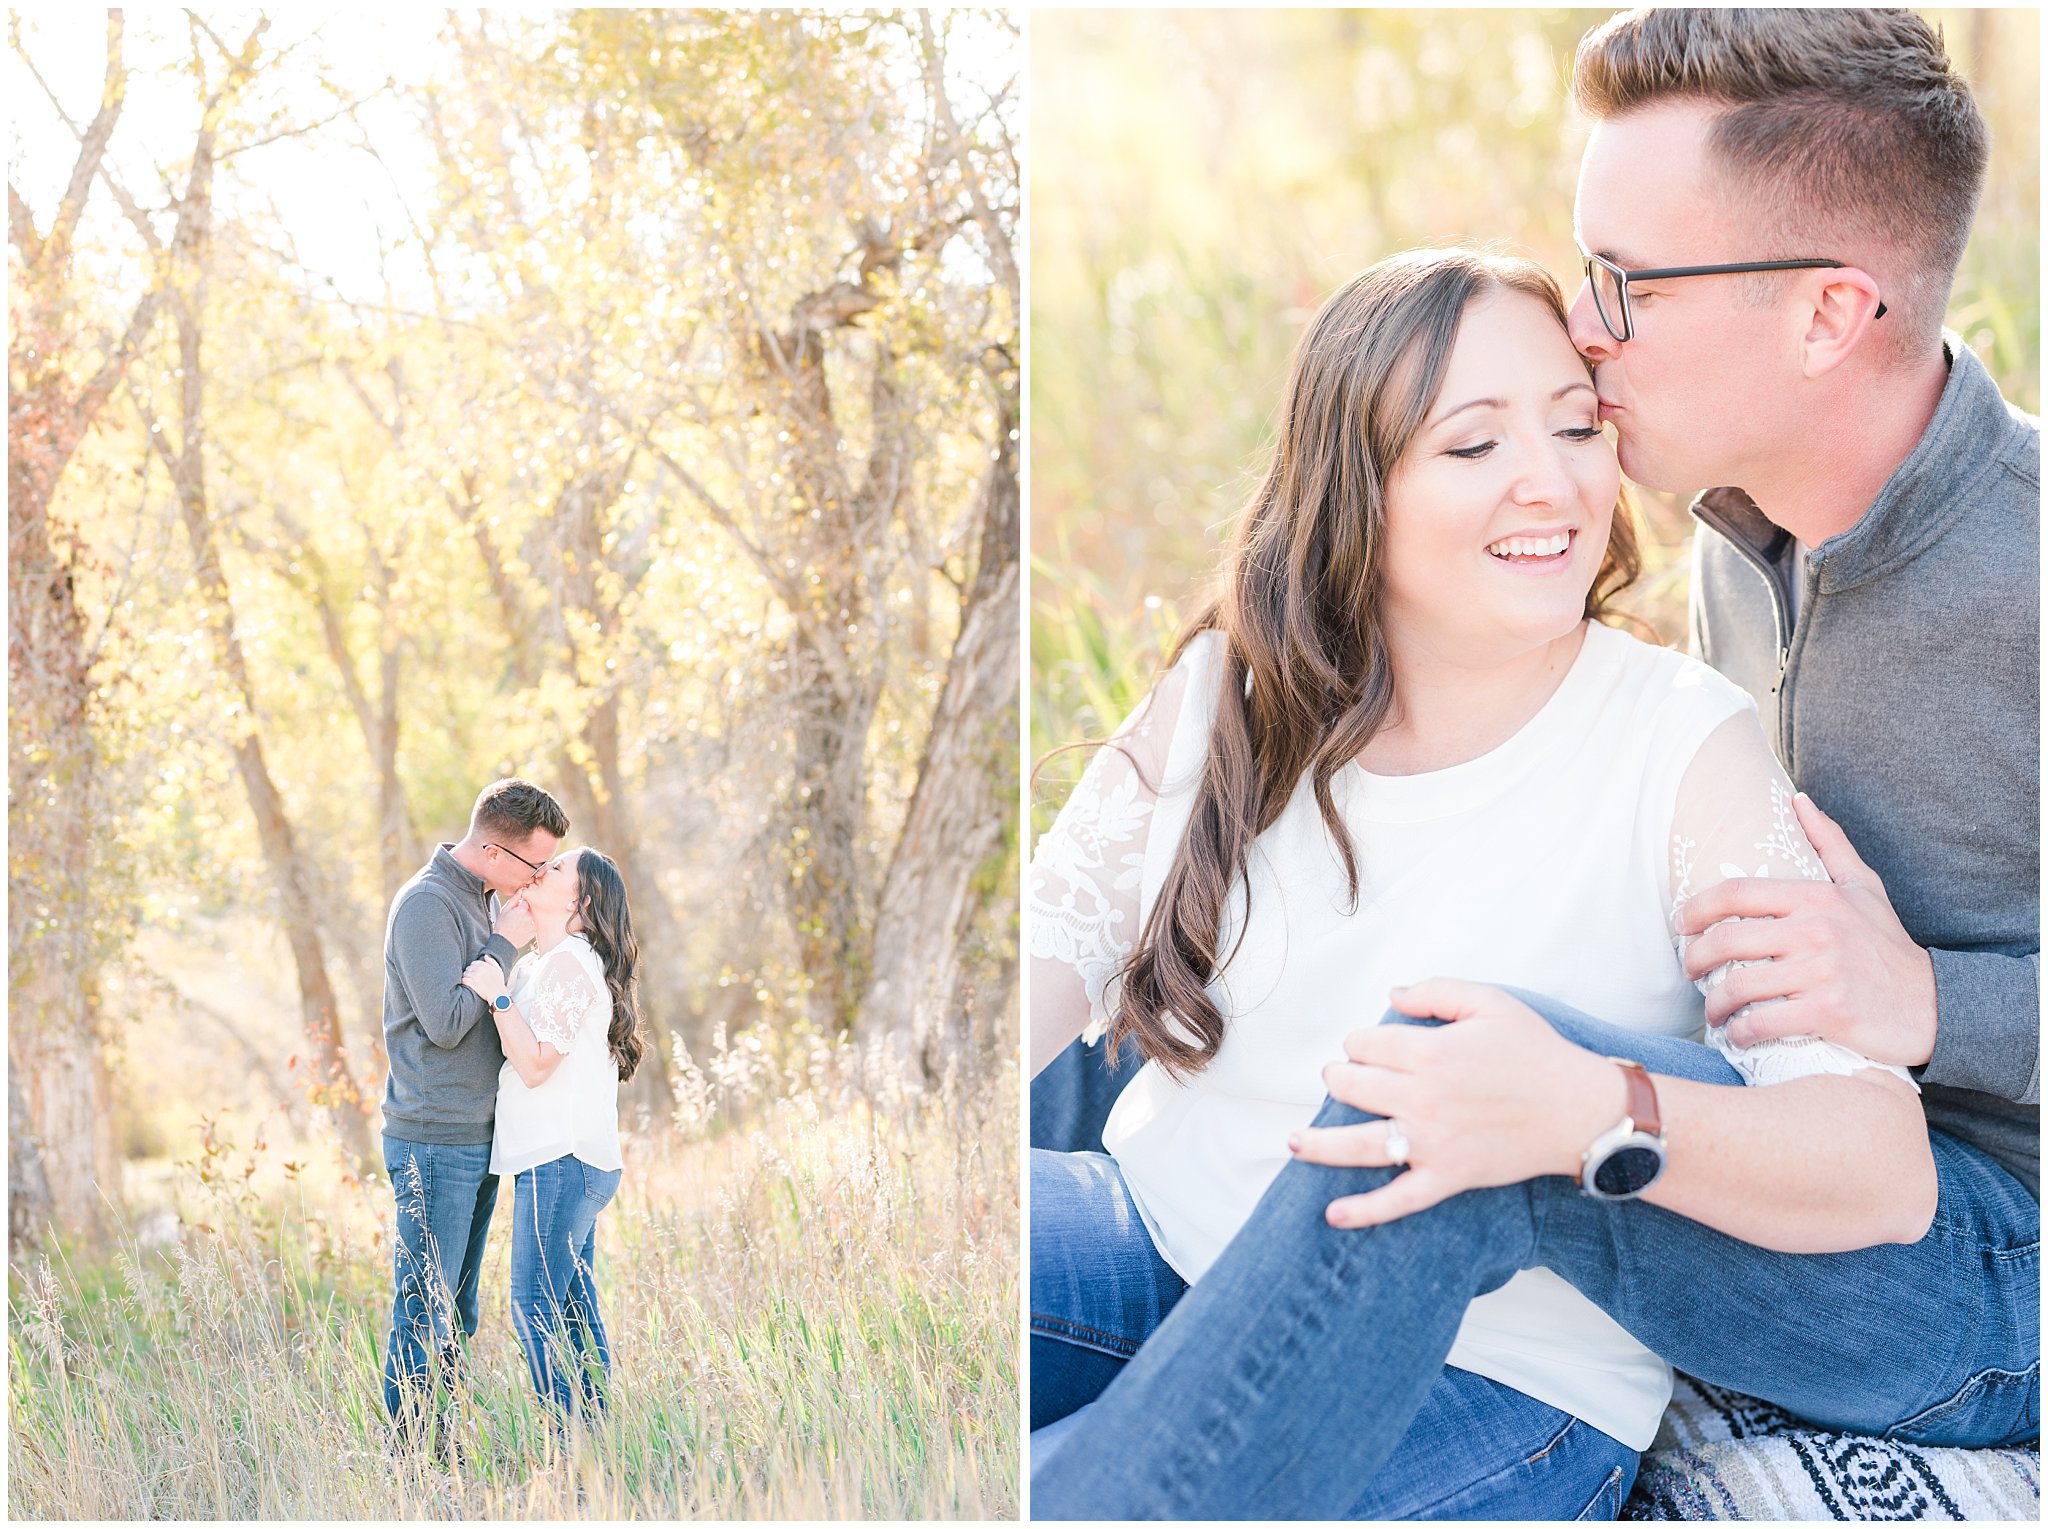 Couple in casual outfit with grey sweater, white top and jeans | Snowbasin woods and fall trees | A Classic Snowbasin Fall Engagement Session | Jessie and Dallin Photography